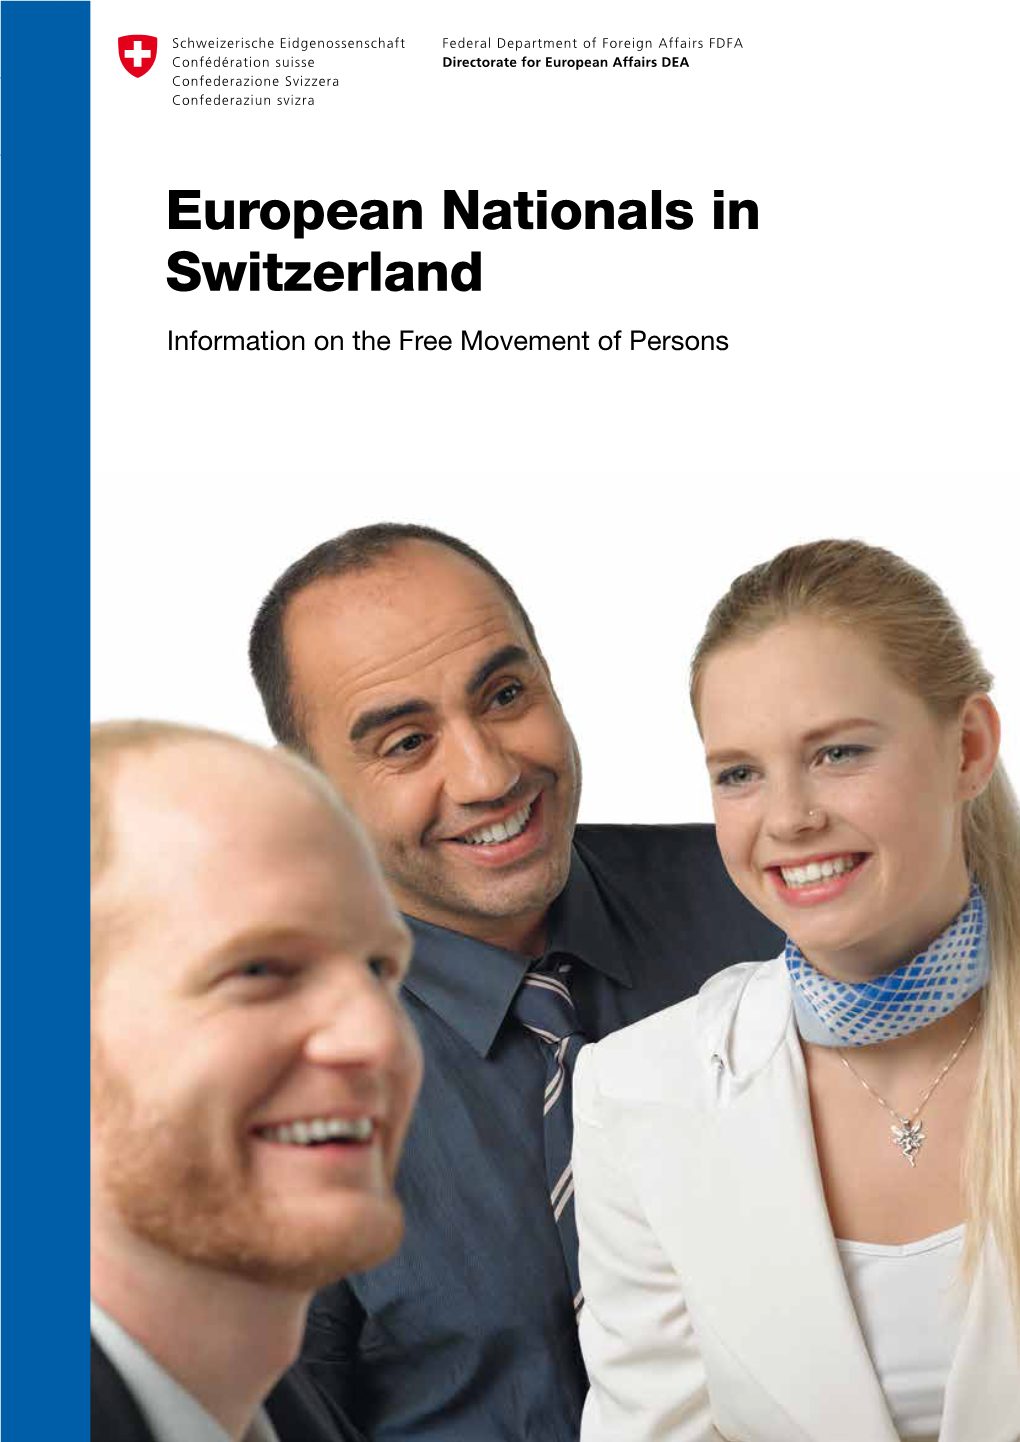 European Nationals in Switzerland Information on the Free Movement of Persons